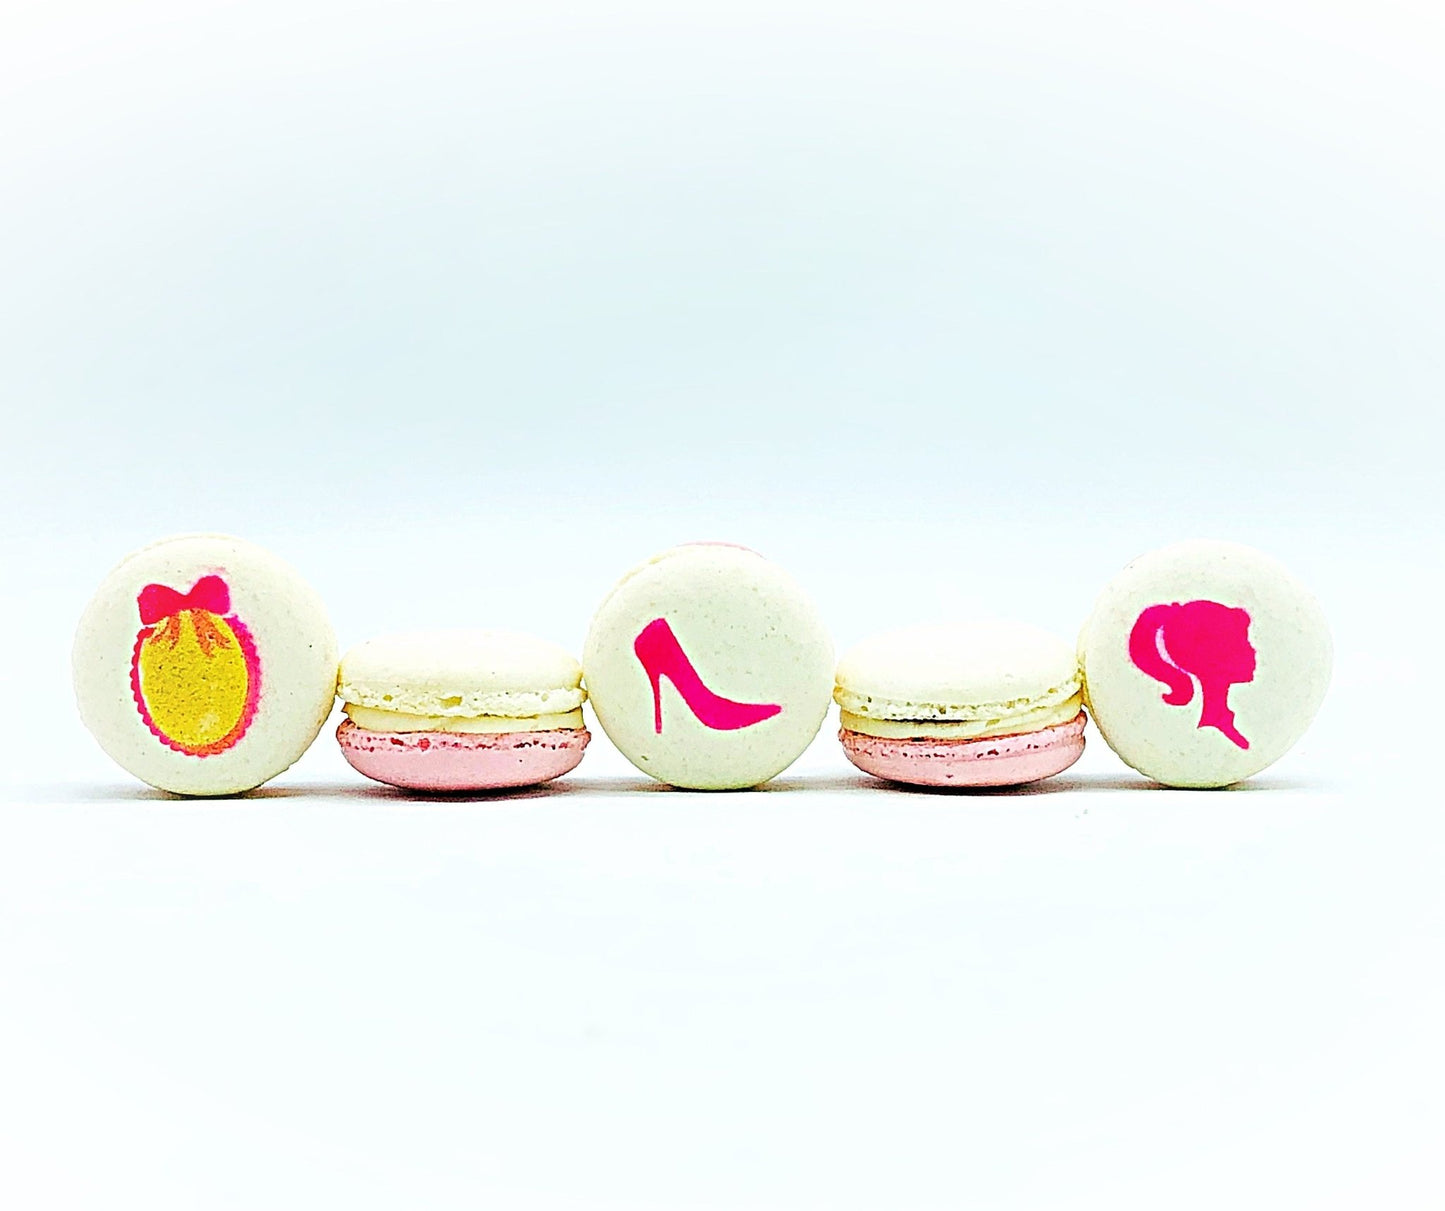 French Macaron Barbie Girl Set | Available in 6 or 12 Pack - Macaron Centrale6 pack